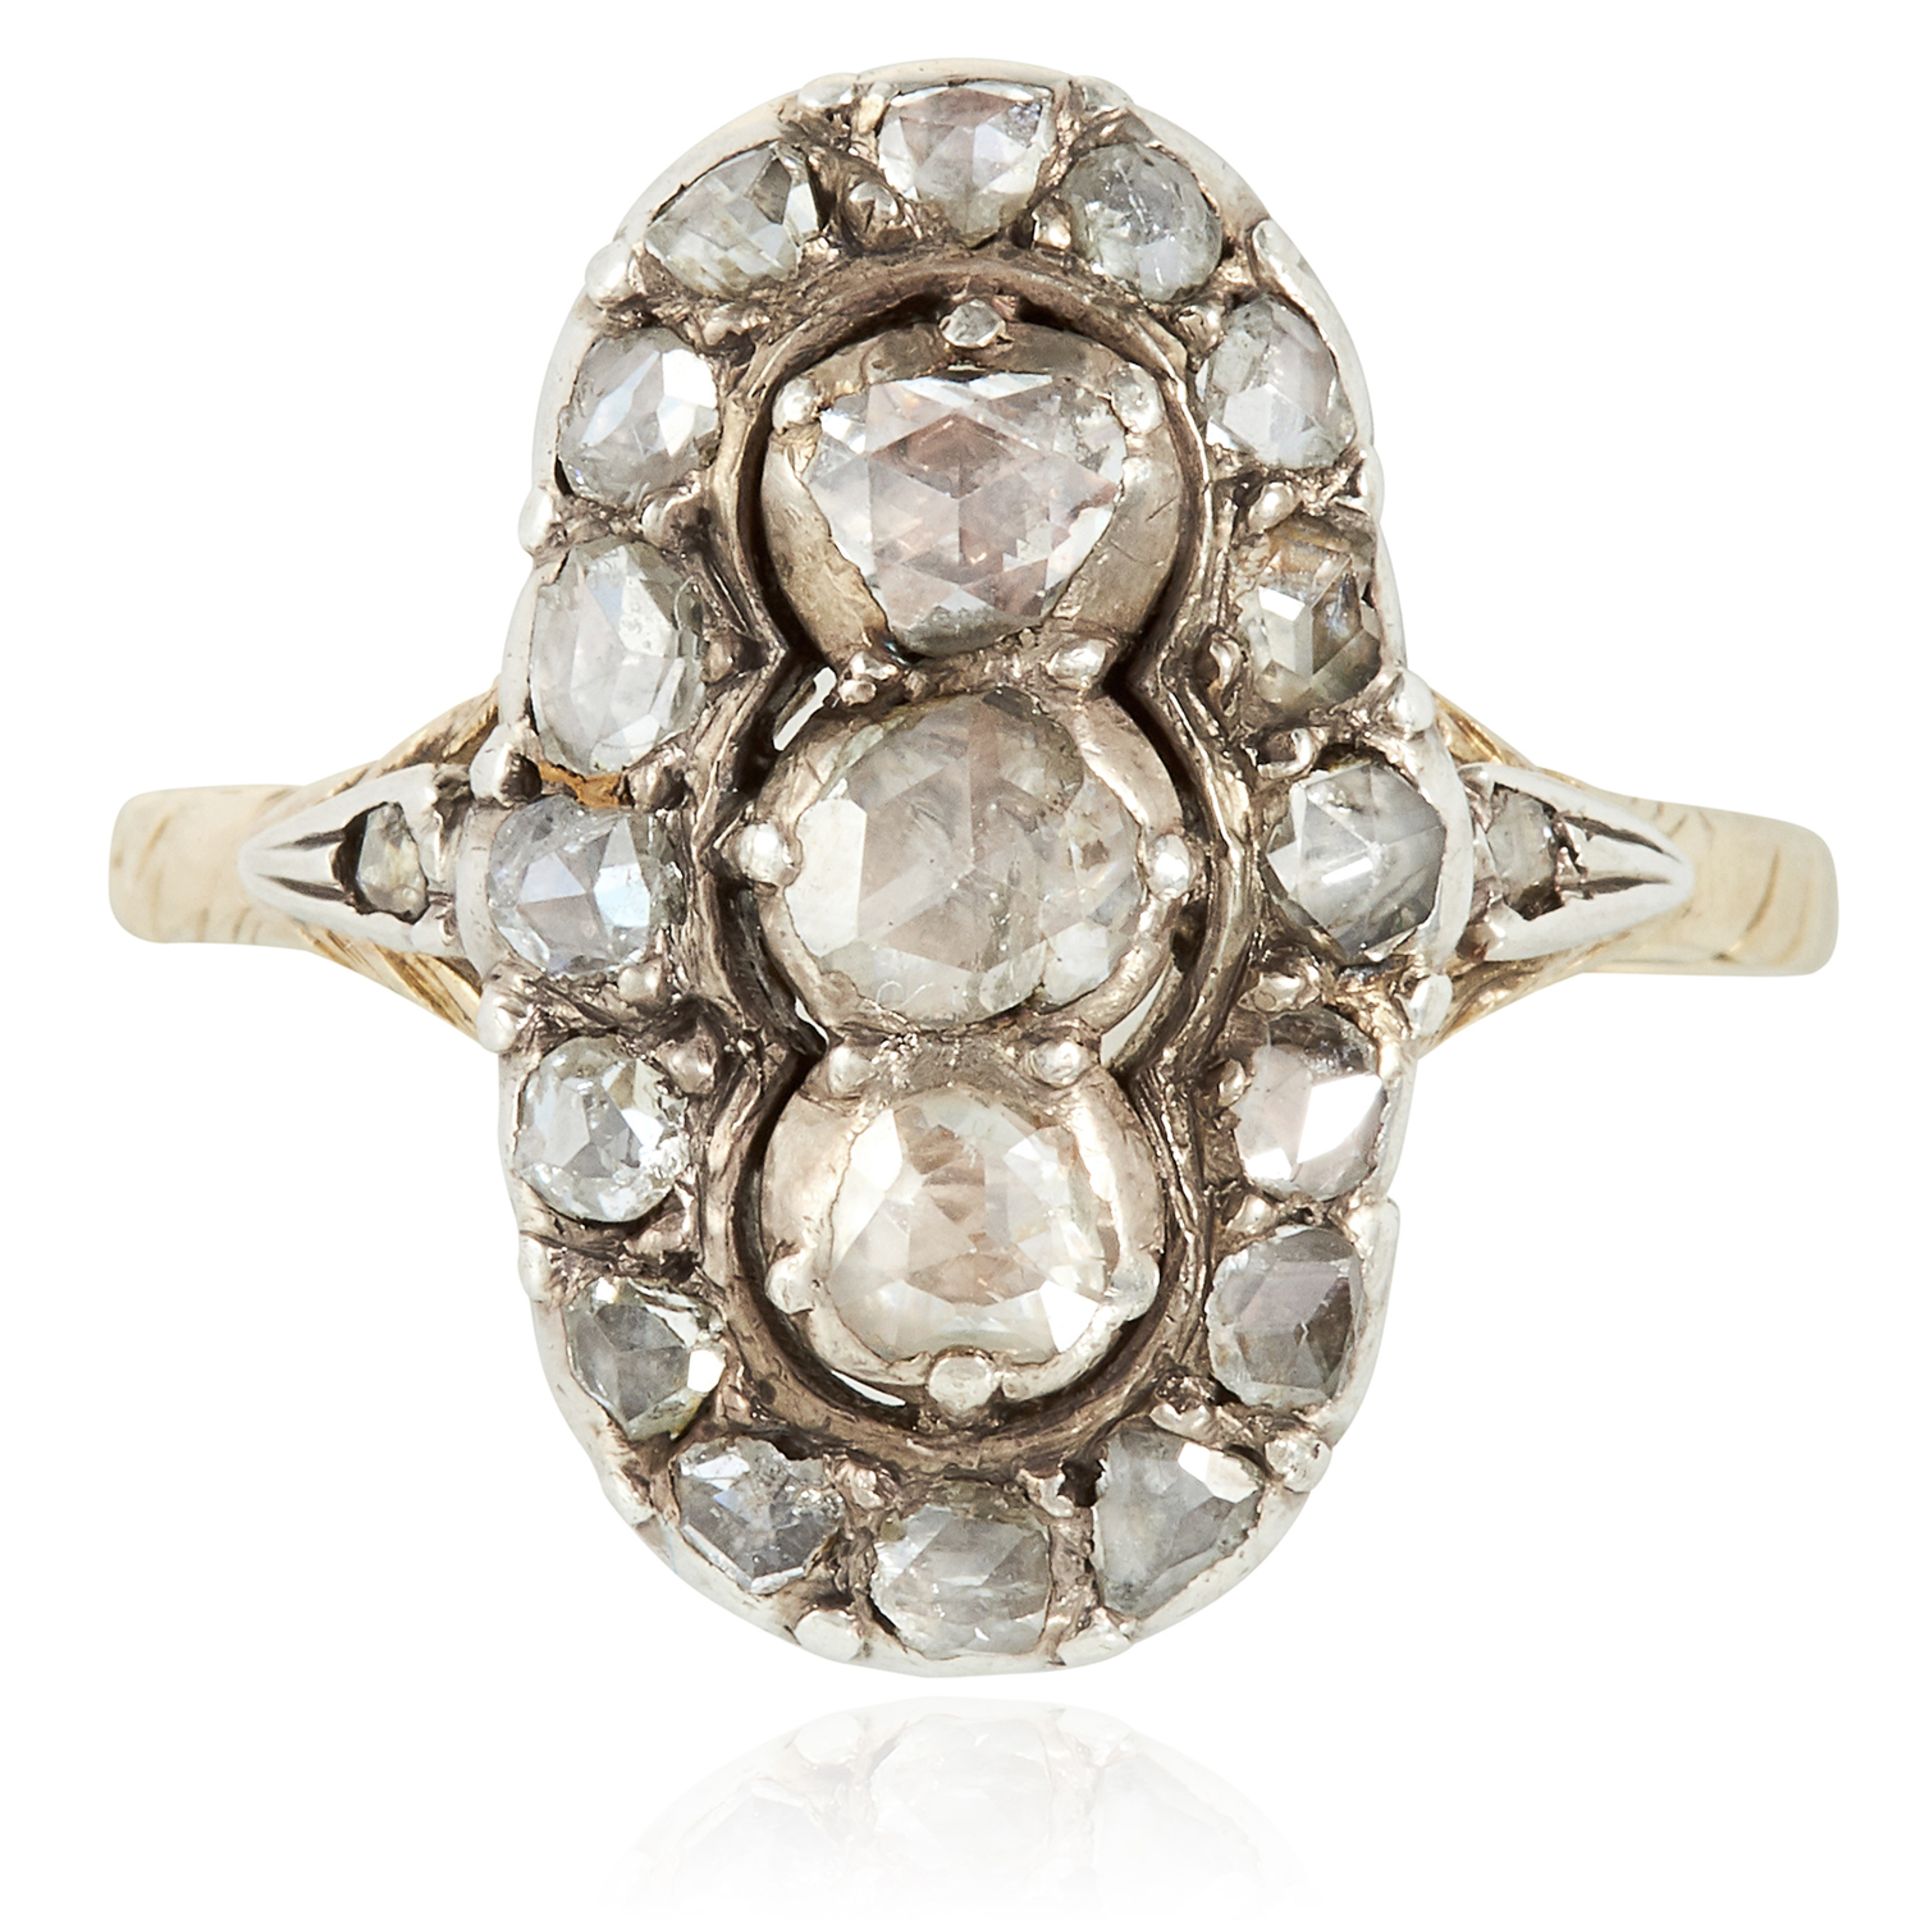 AN ANTIQUE DIAMOND CLUSTER RING, DUTCH 19TH CENTURY in high carat yellow gold and silver, the oval